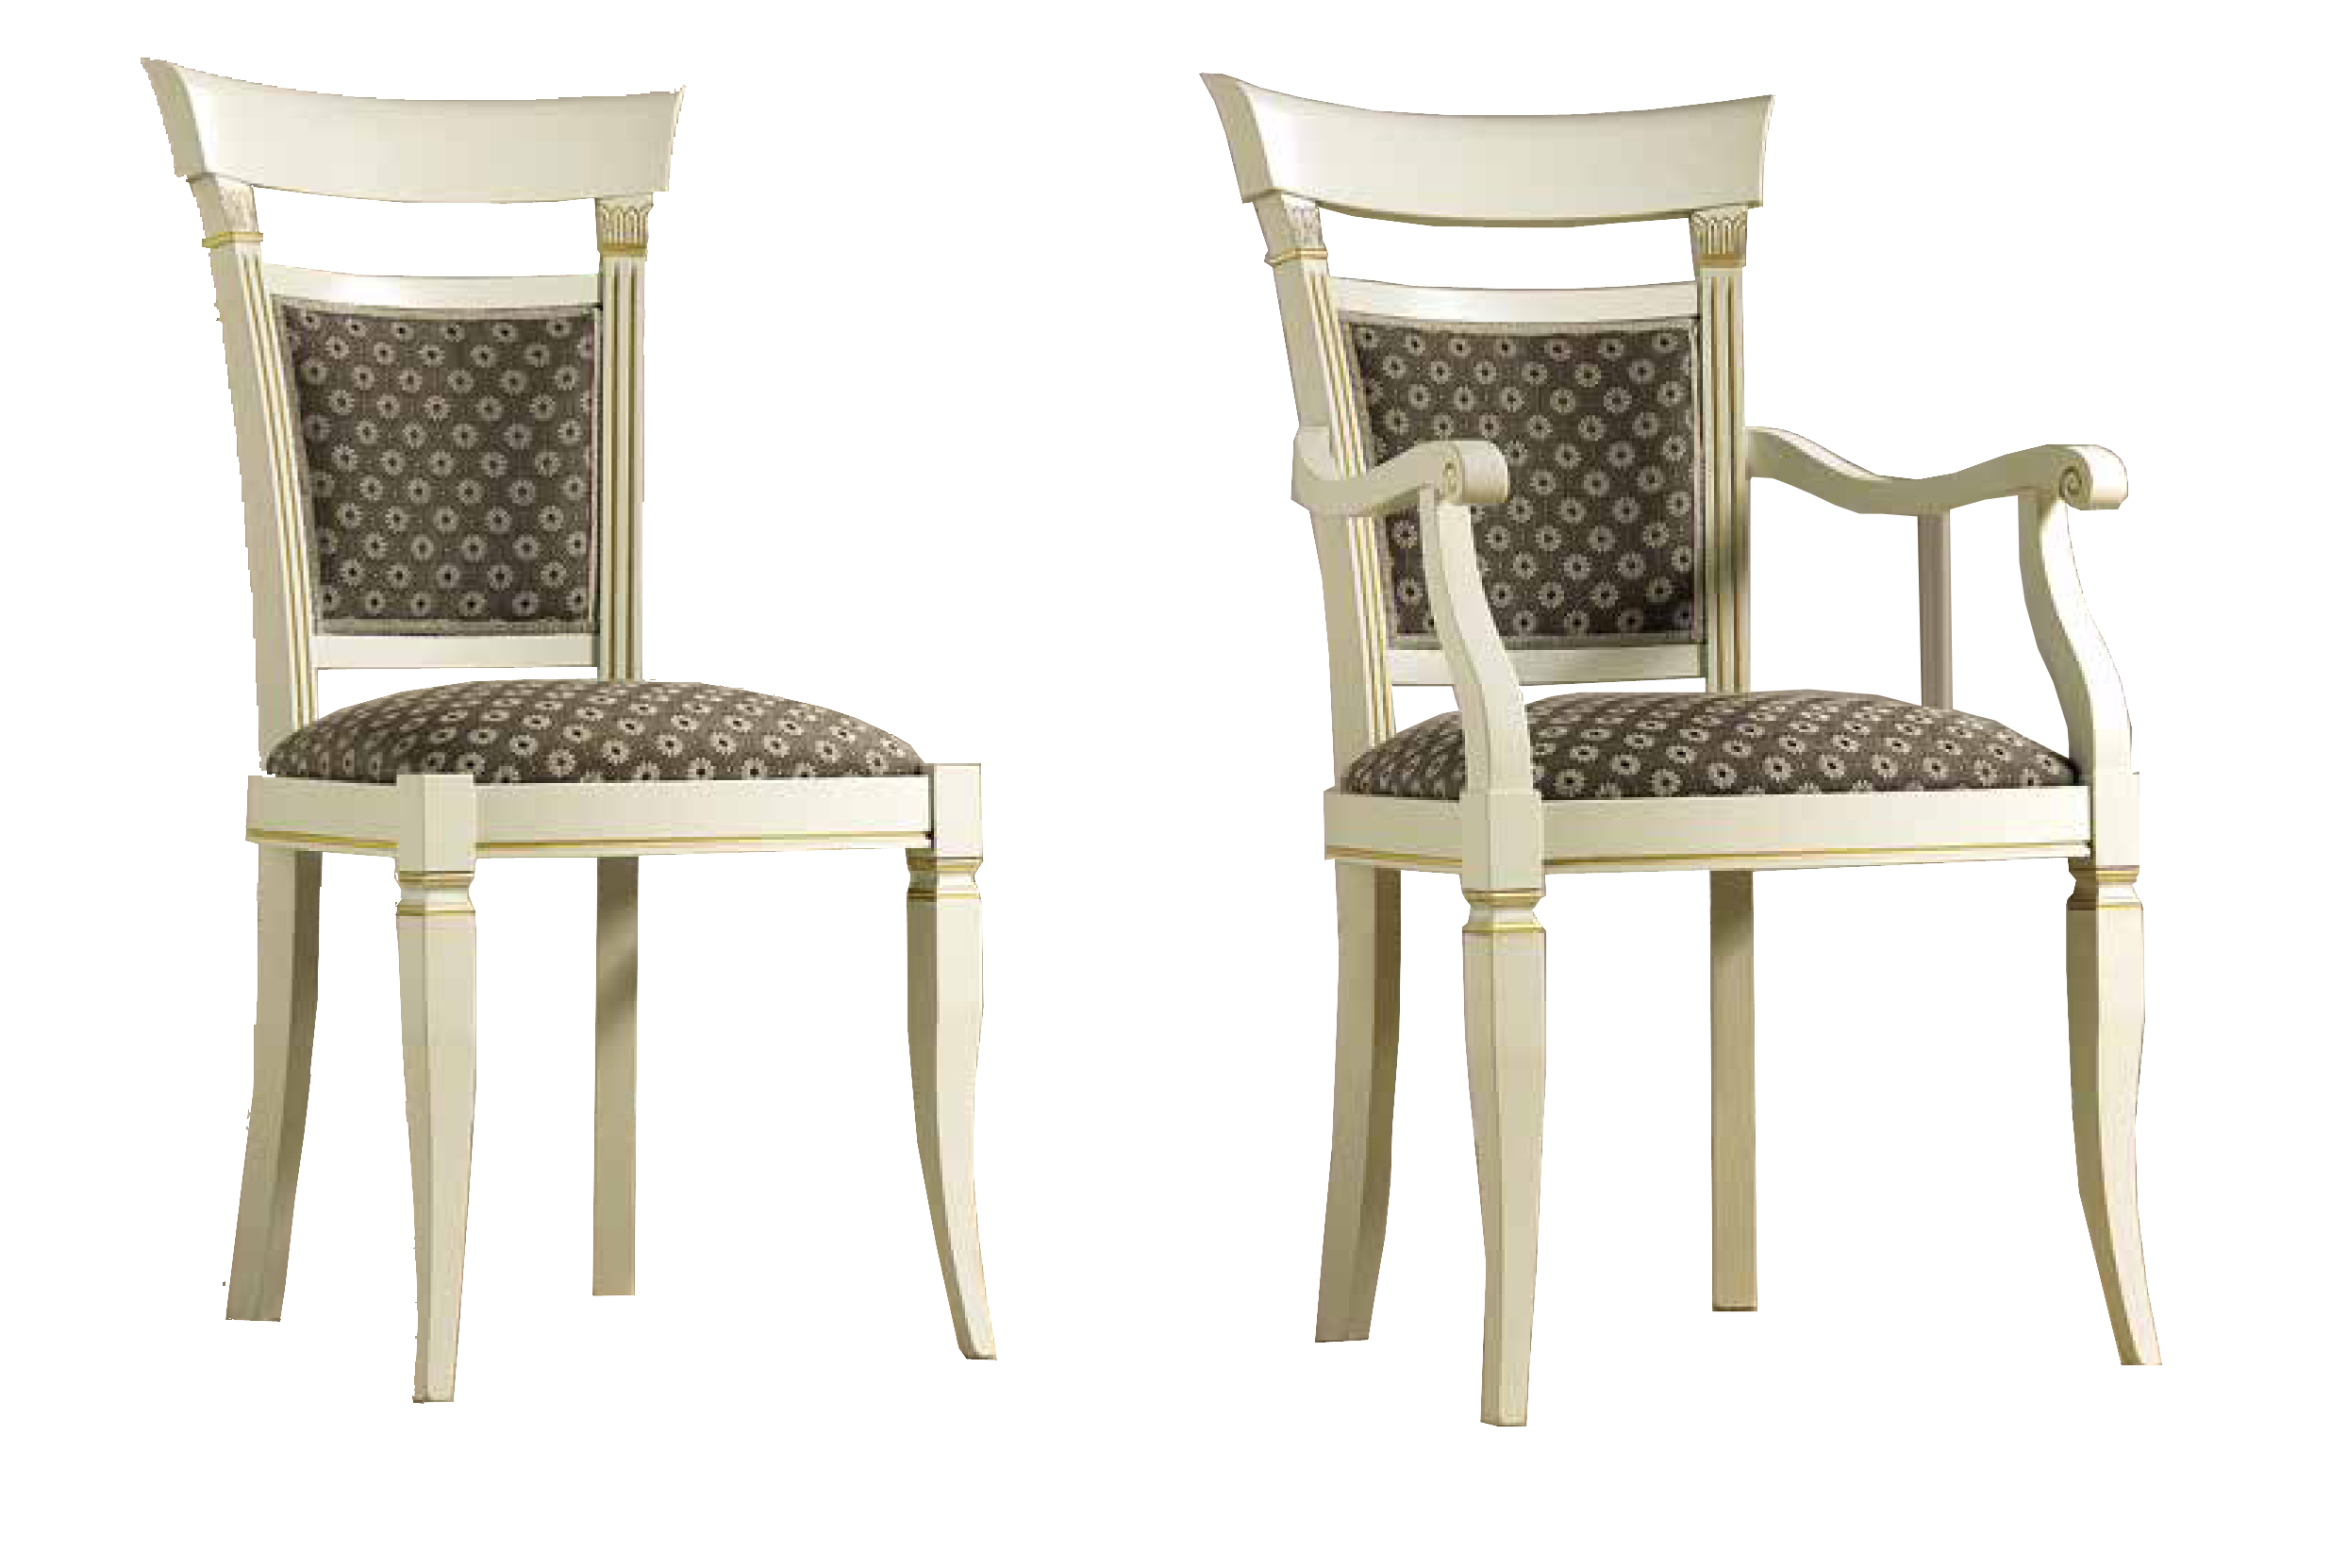 Brands Garcia Sabate REPLAY Treviso Chairs White Ash